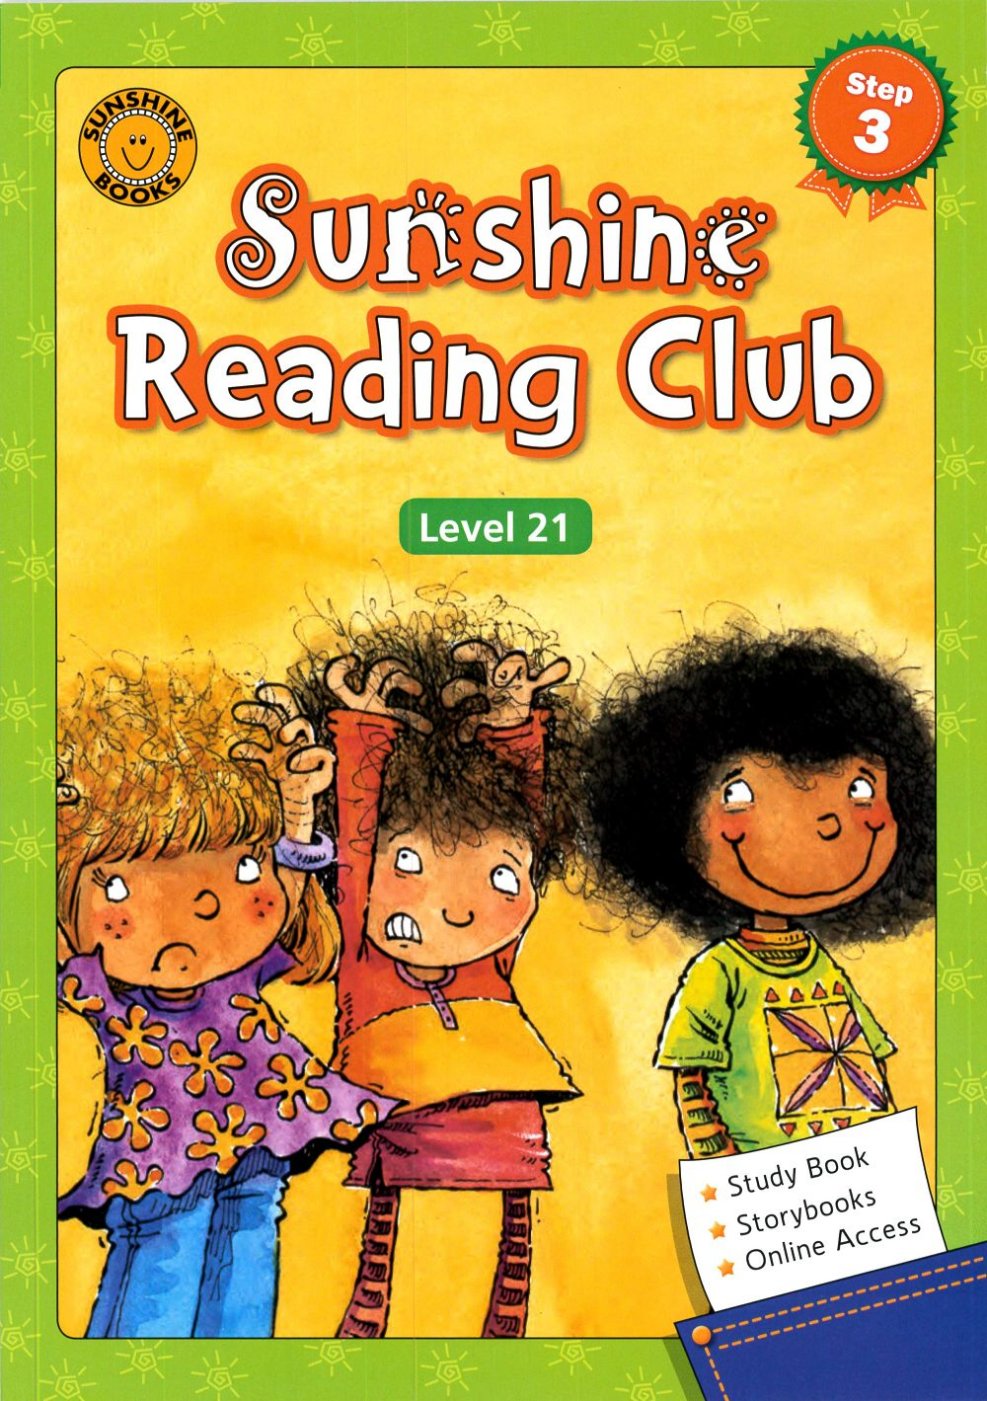 Sunshine Reading Club Level 21 Study Book with Storybooks and Online Access Code